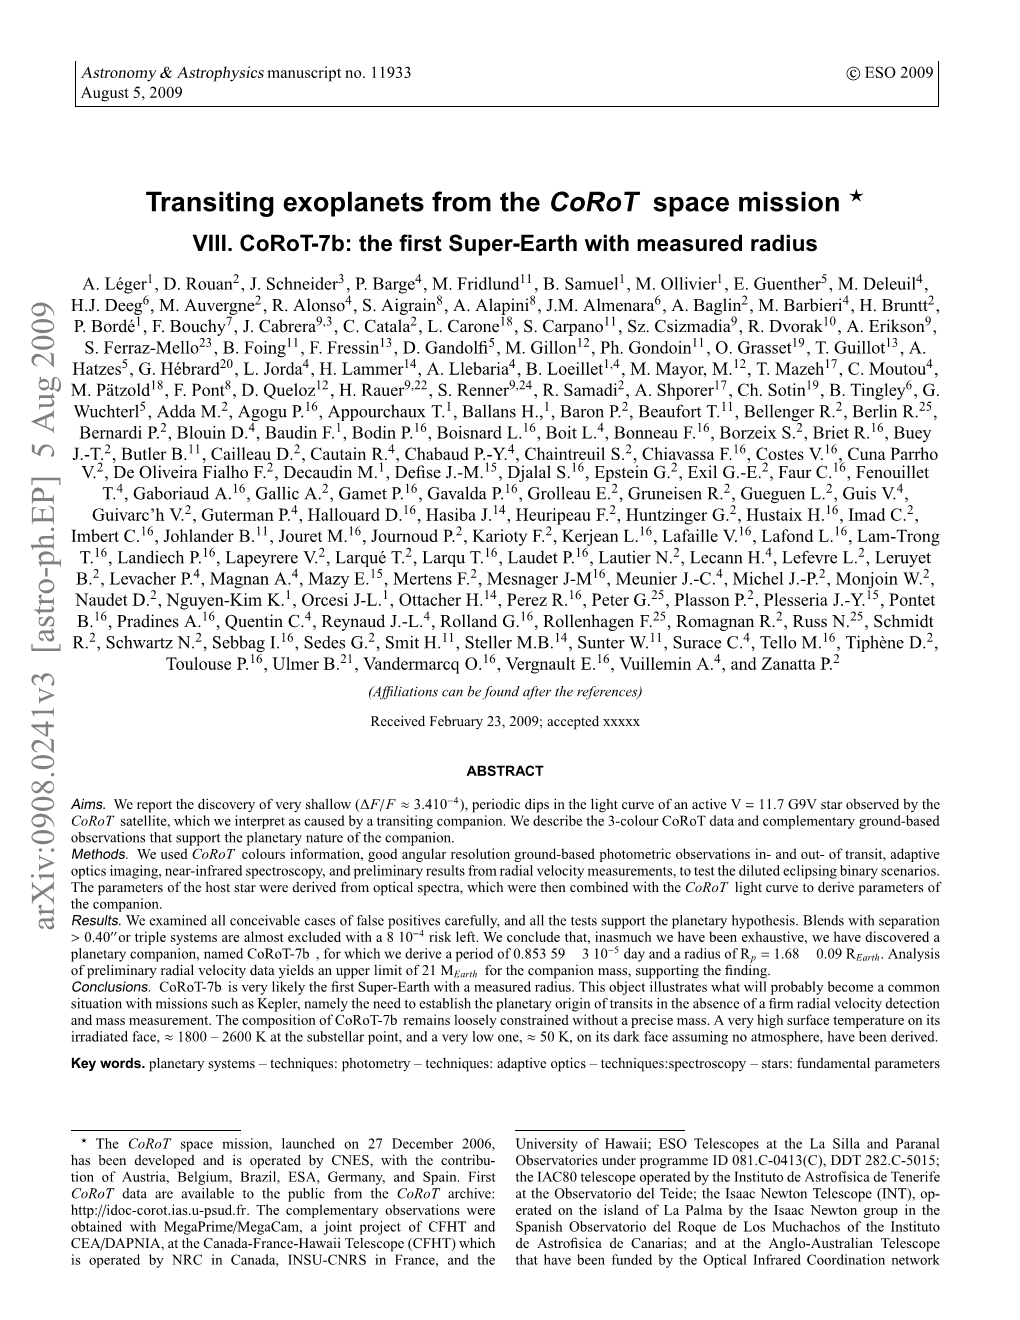 Transiting Exoplanets from the Corot Space Mission